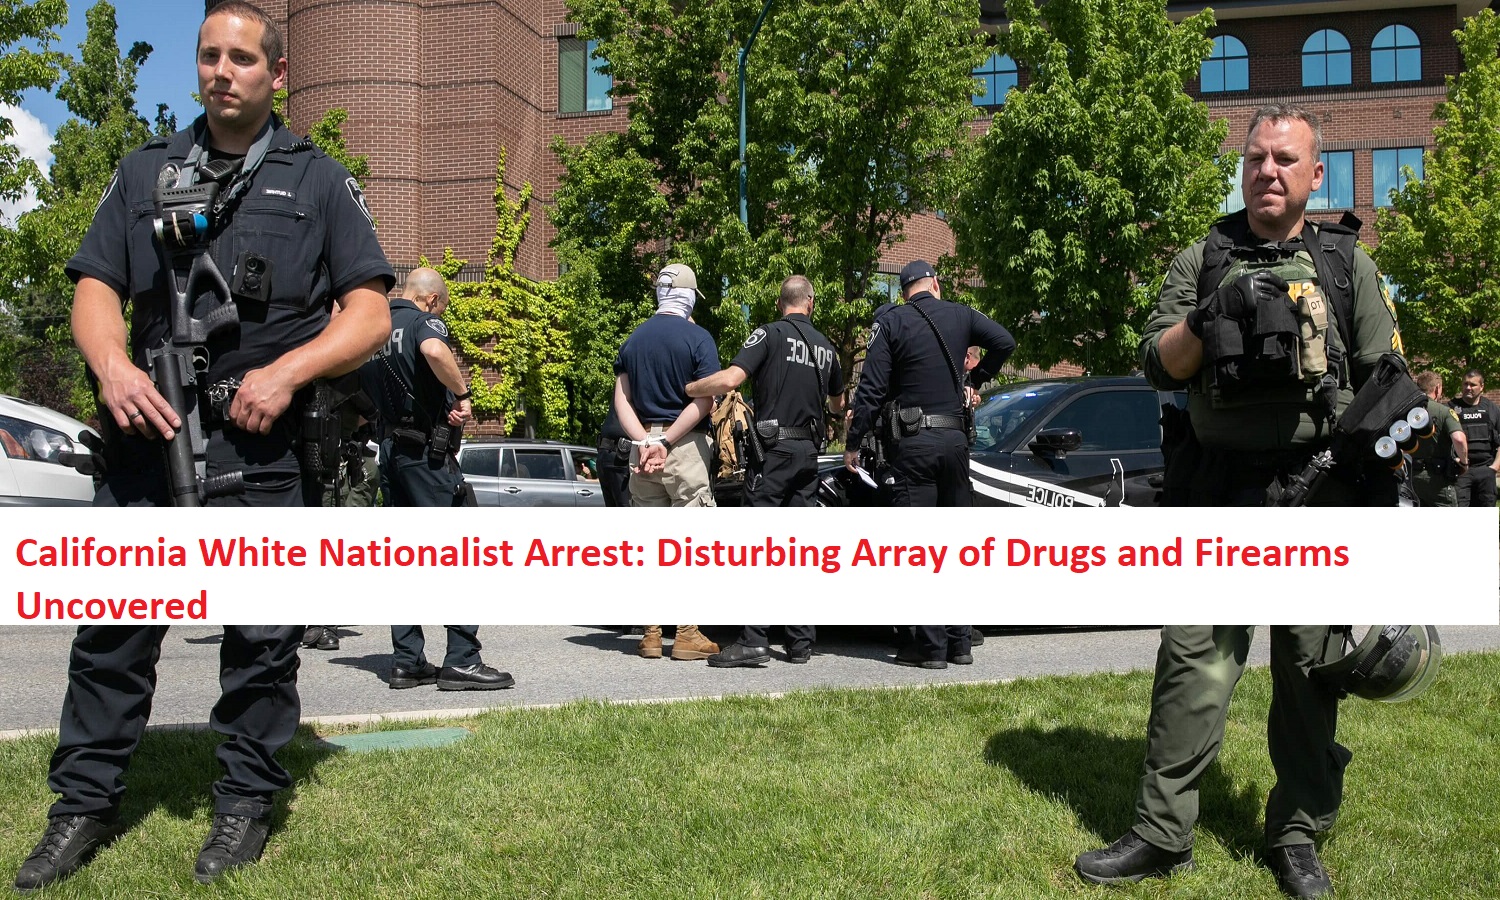 California White Nationalist Arrest: Disturbing Array of Drugs and Firearms Uncovered